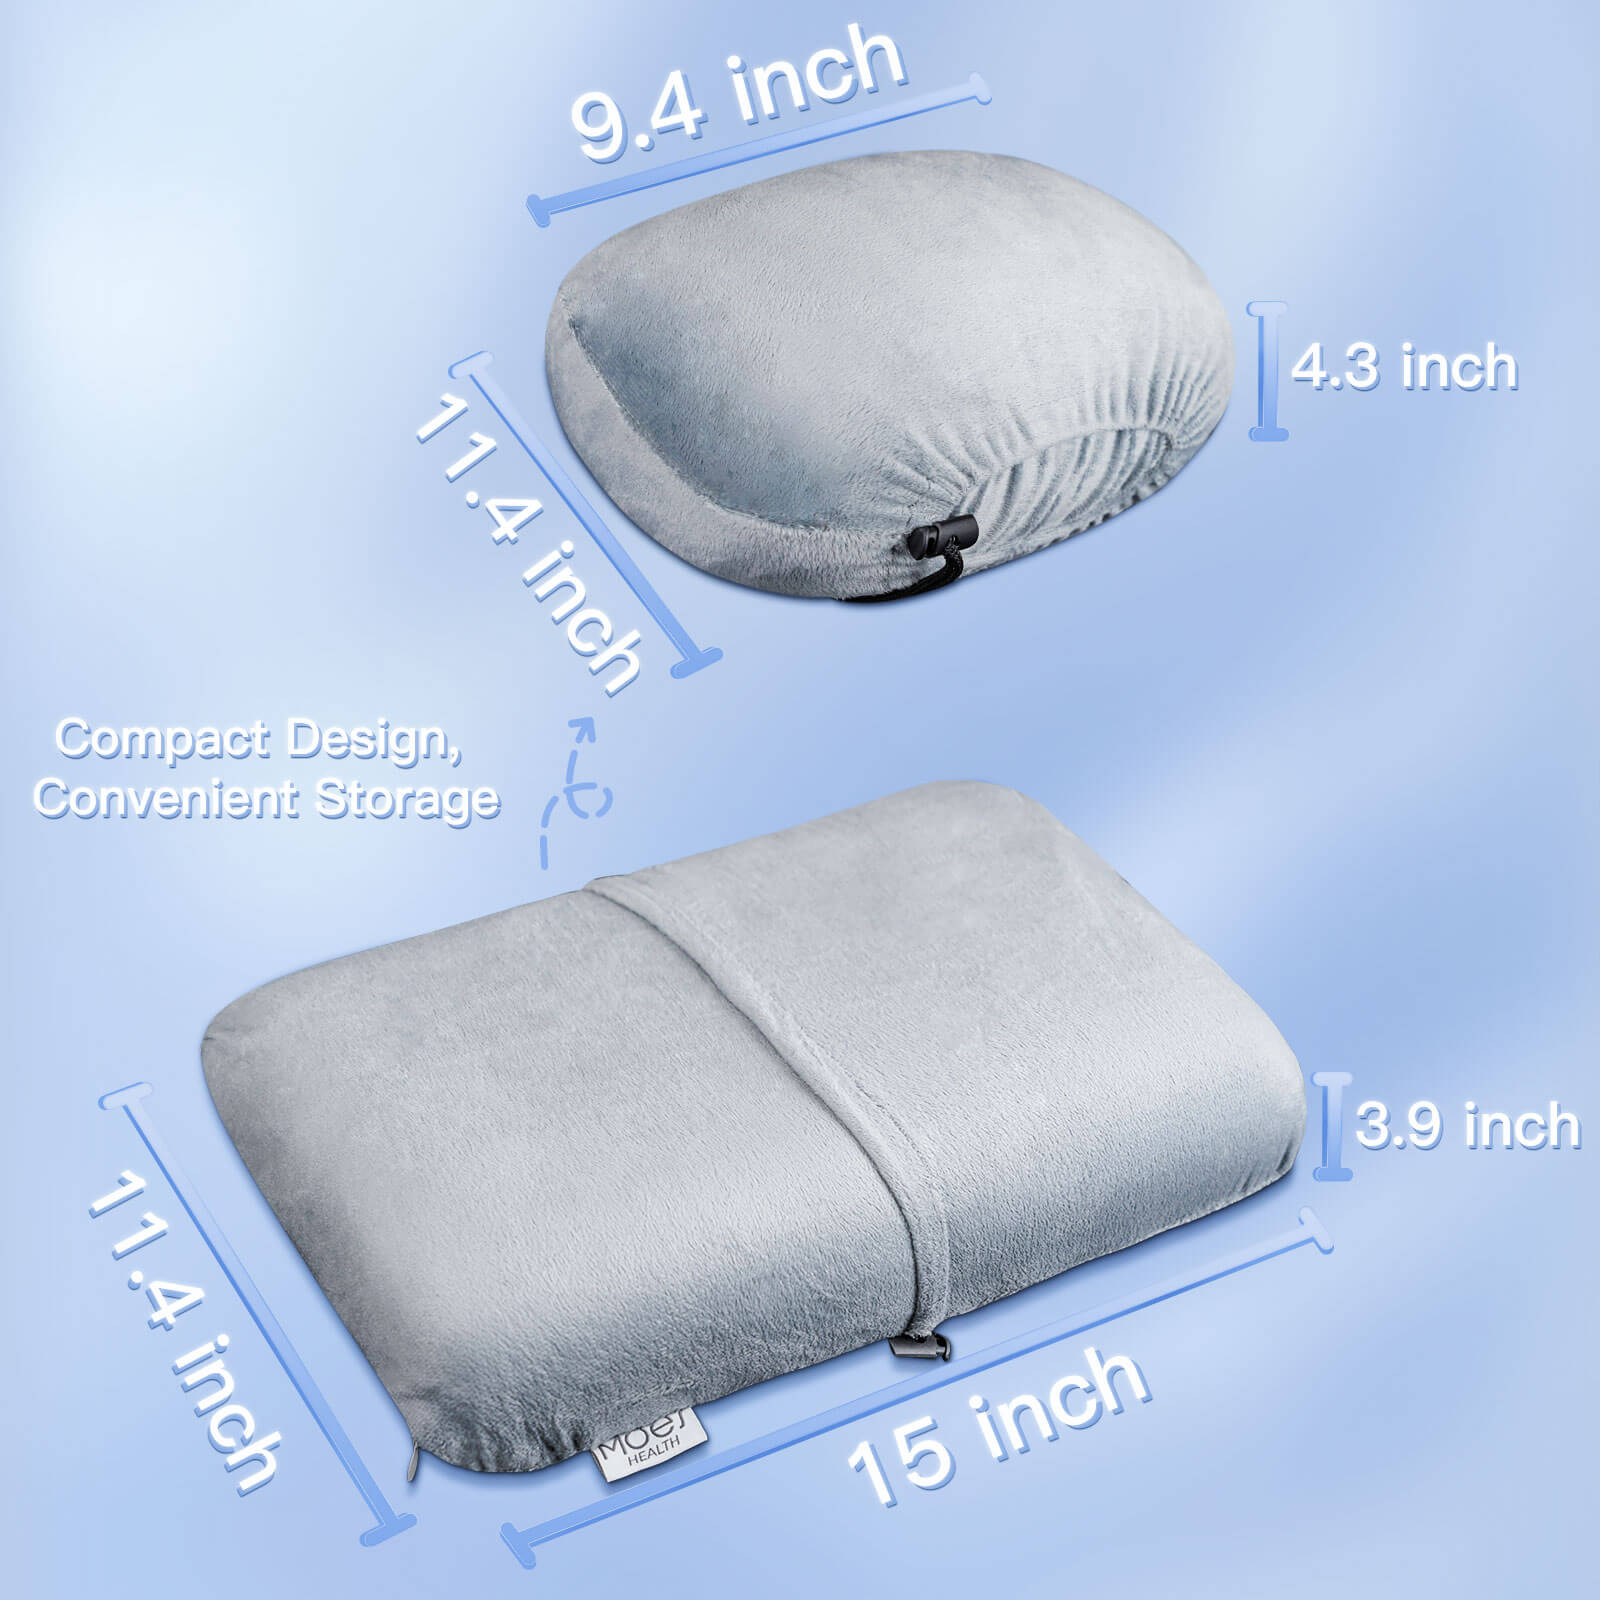 MOES Small Camping Pillow Memory Foam Travel Pillow With Portable Bag 15"x11.4" - MOES